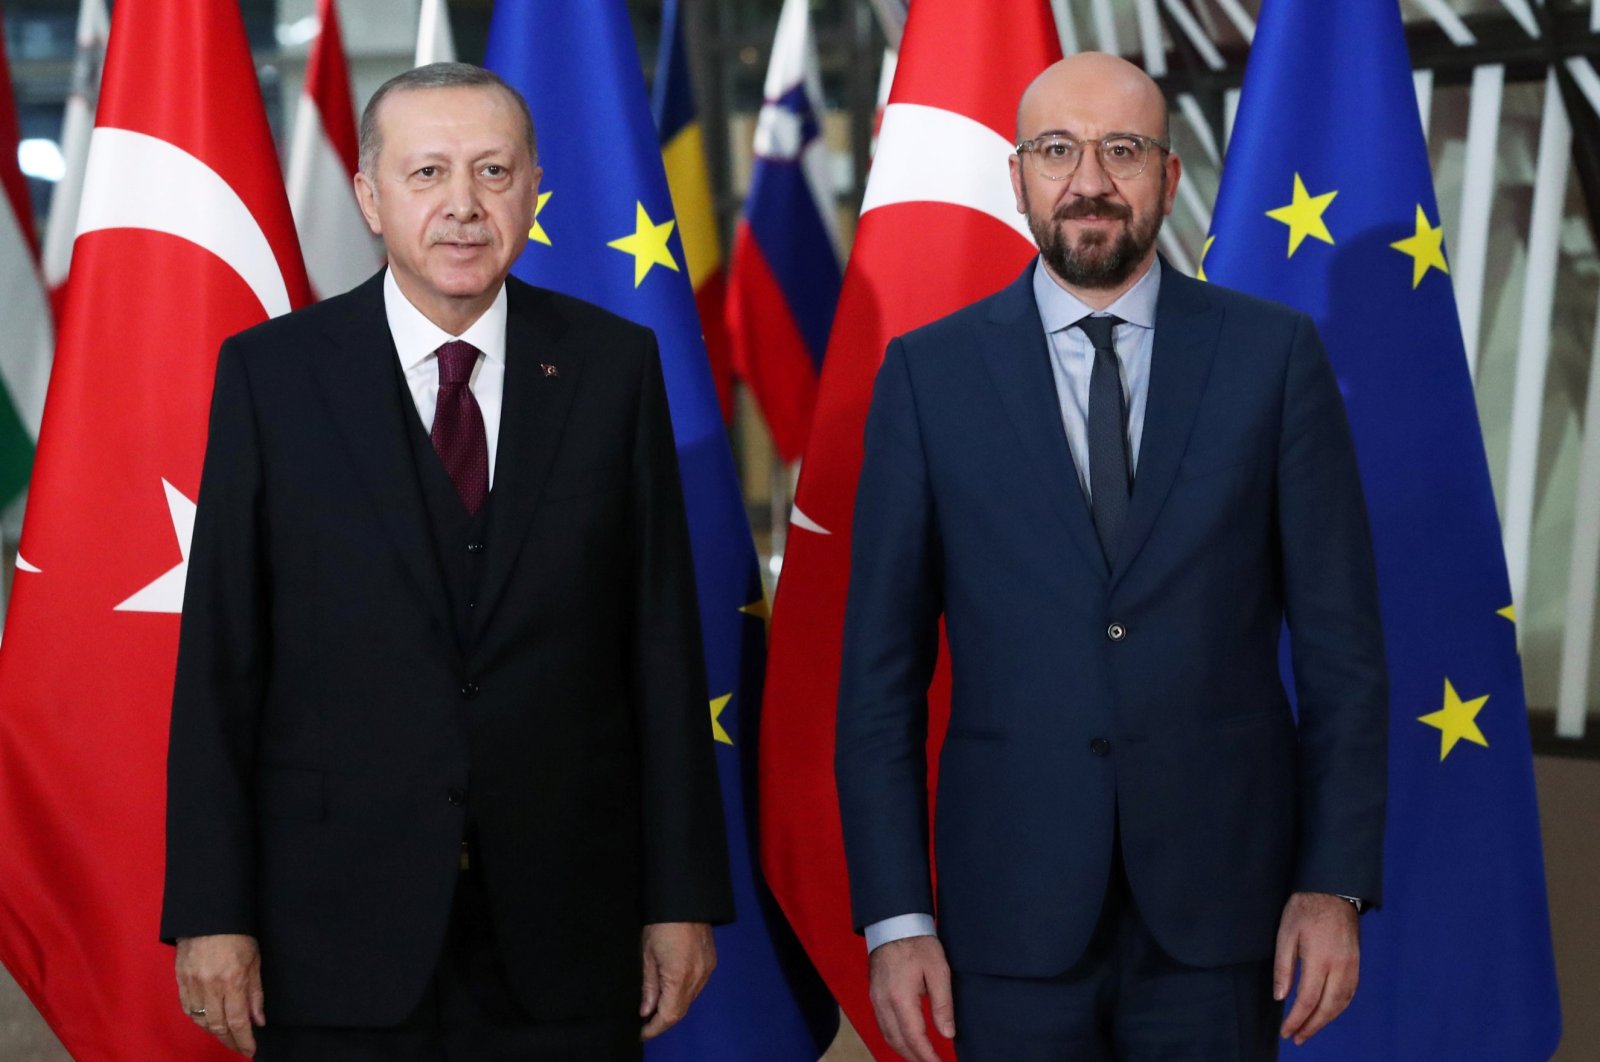 Turkish President Tayyip Erdoğan and EU Council President Charles Michel pose in Brussels, Belgium March 9, 2020. (Reuters File Photo)